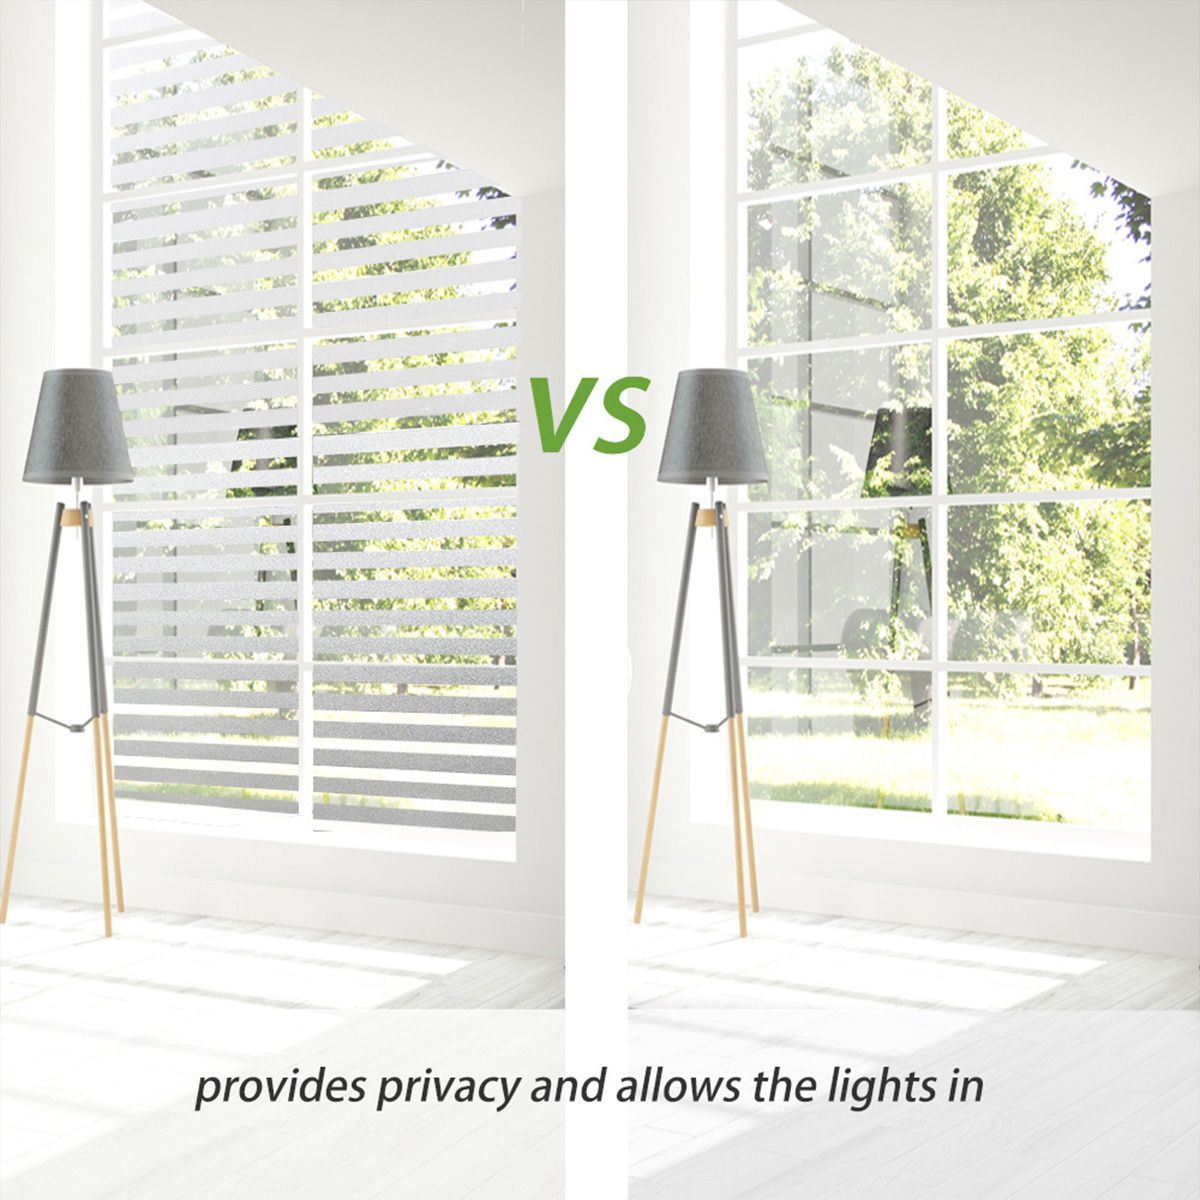 30cm-Wide-Frosted-Glass-Film-Static-Cling-Window-Film-Sticker-Privacy-Decor-1706507